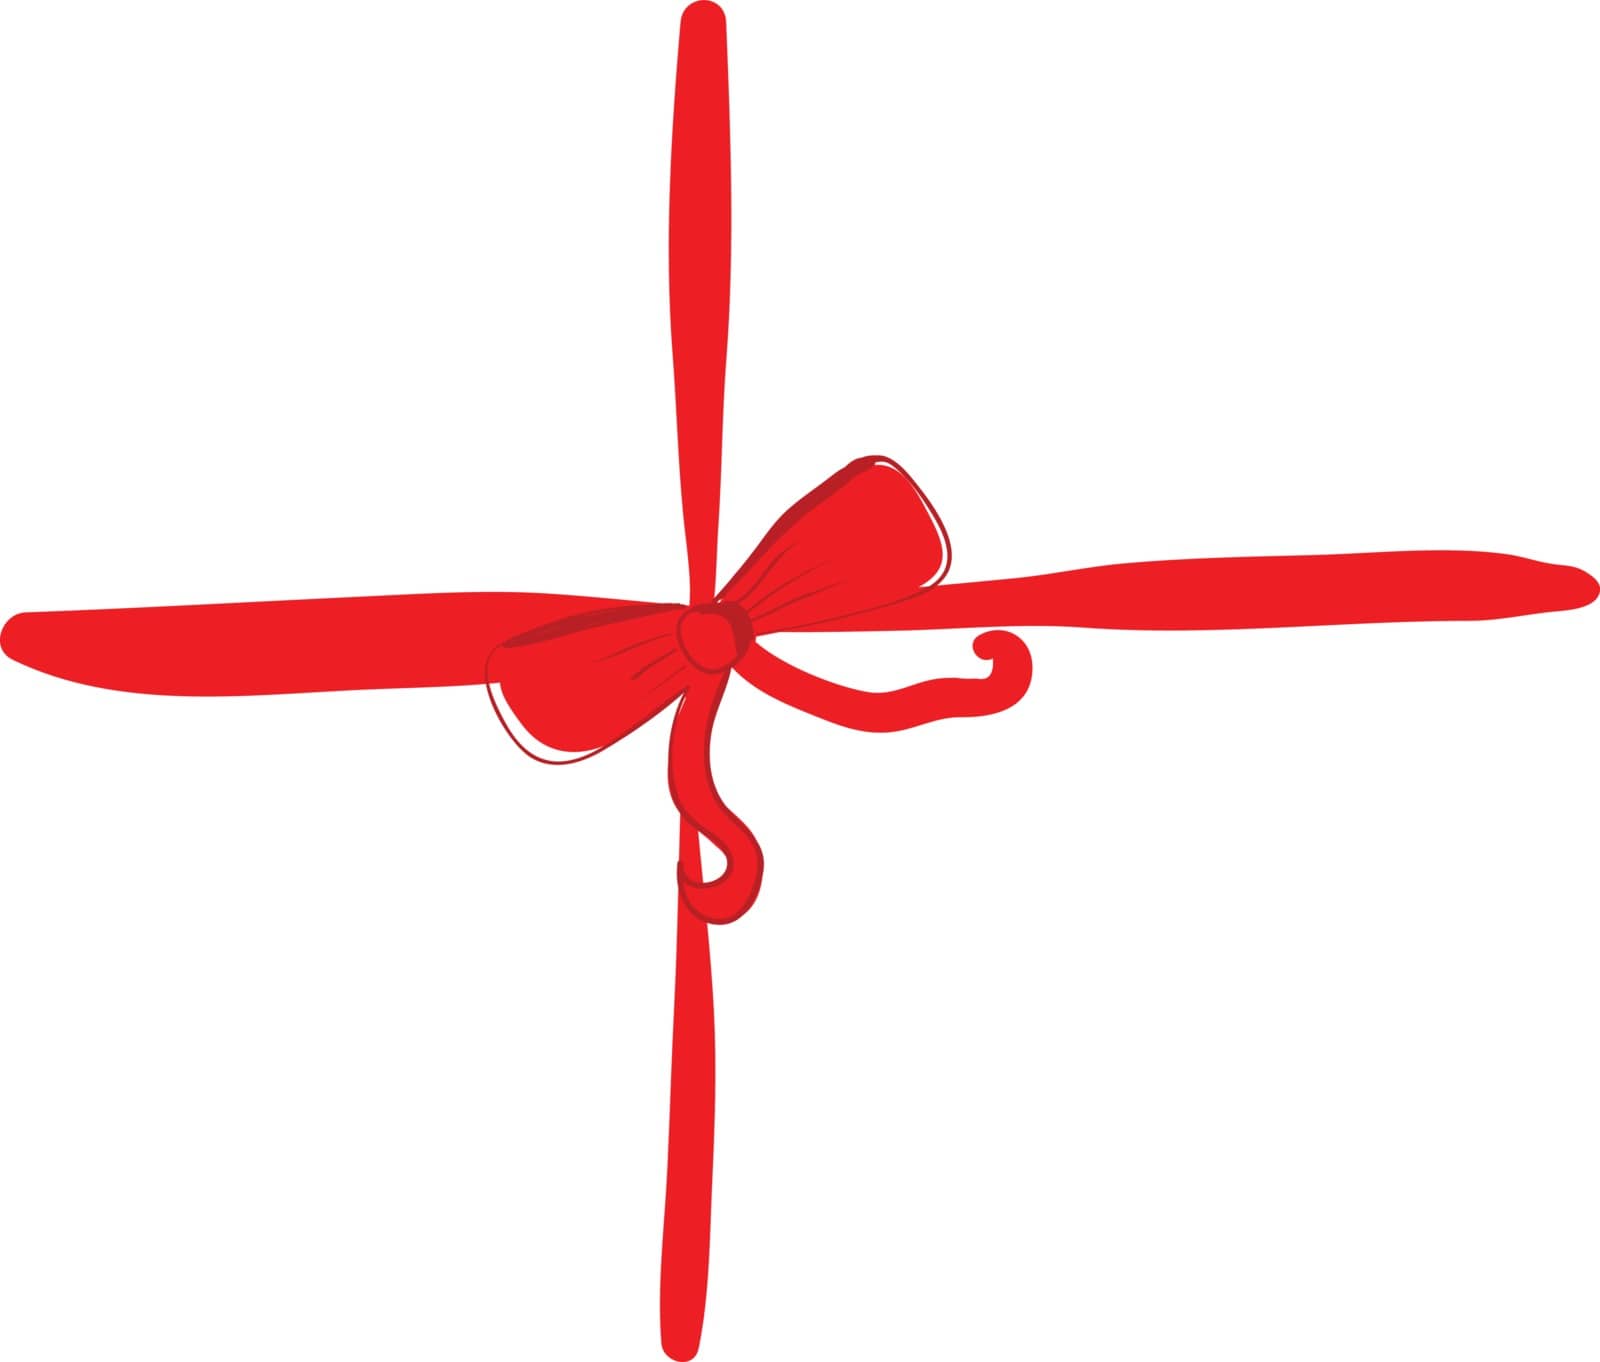 A red color bow used for decorating gifts and presents vector color drawing or illustration